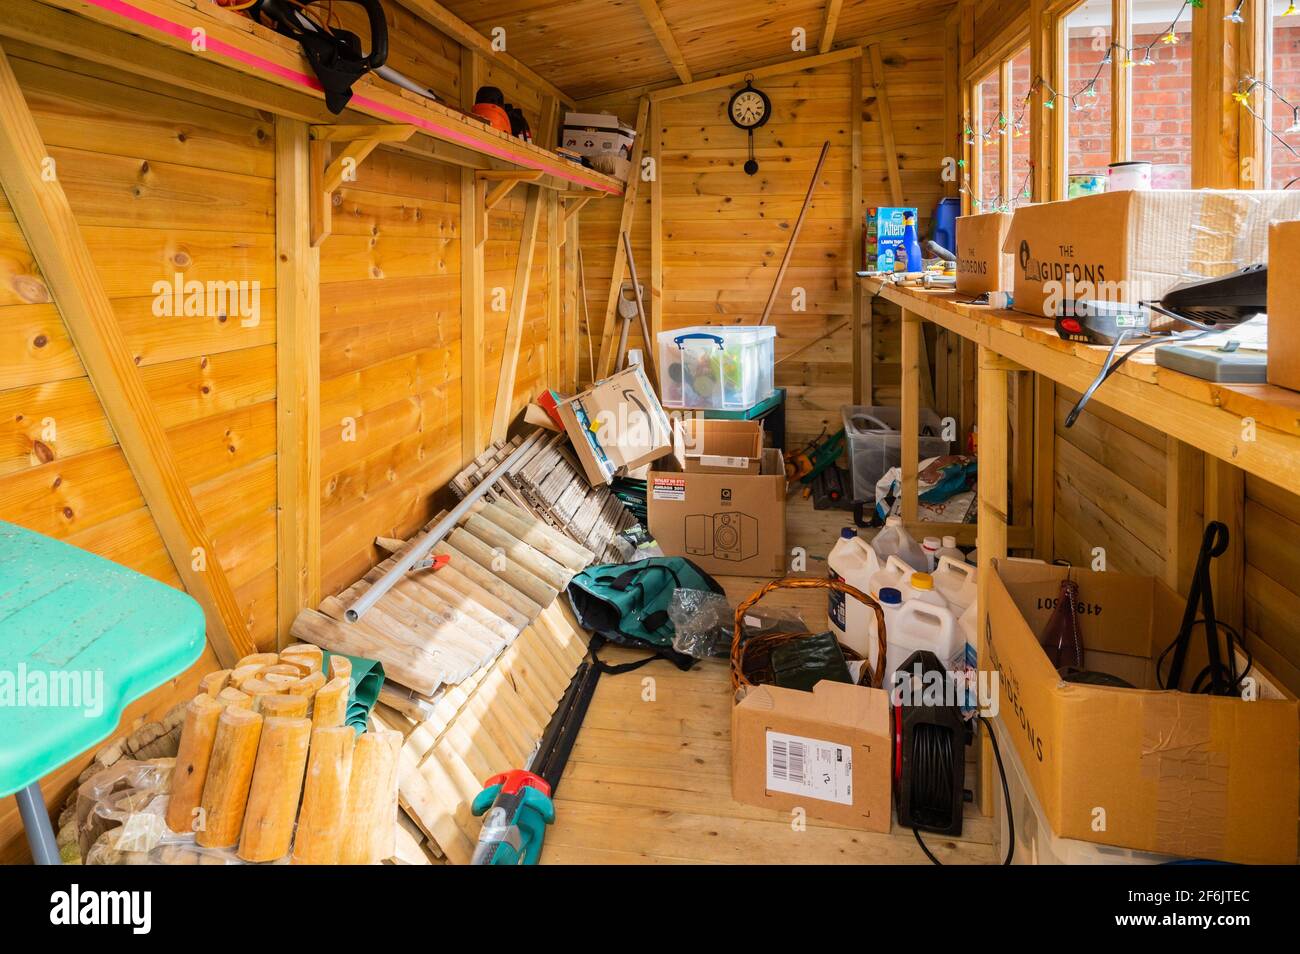 Interior of a half empty but messy wooden garden shed or tool shed in the UK. Stock Photo